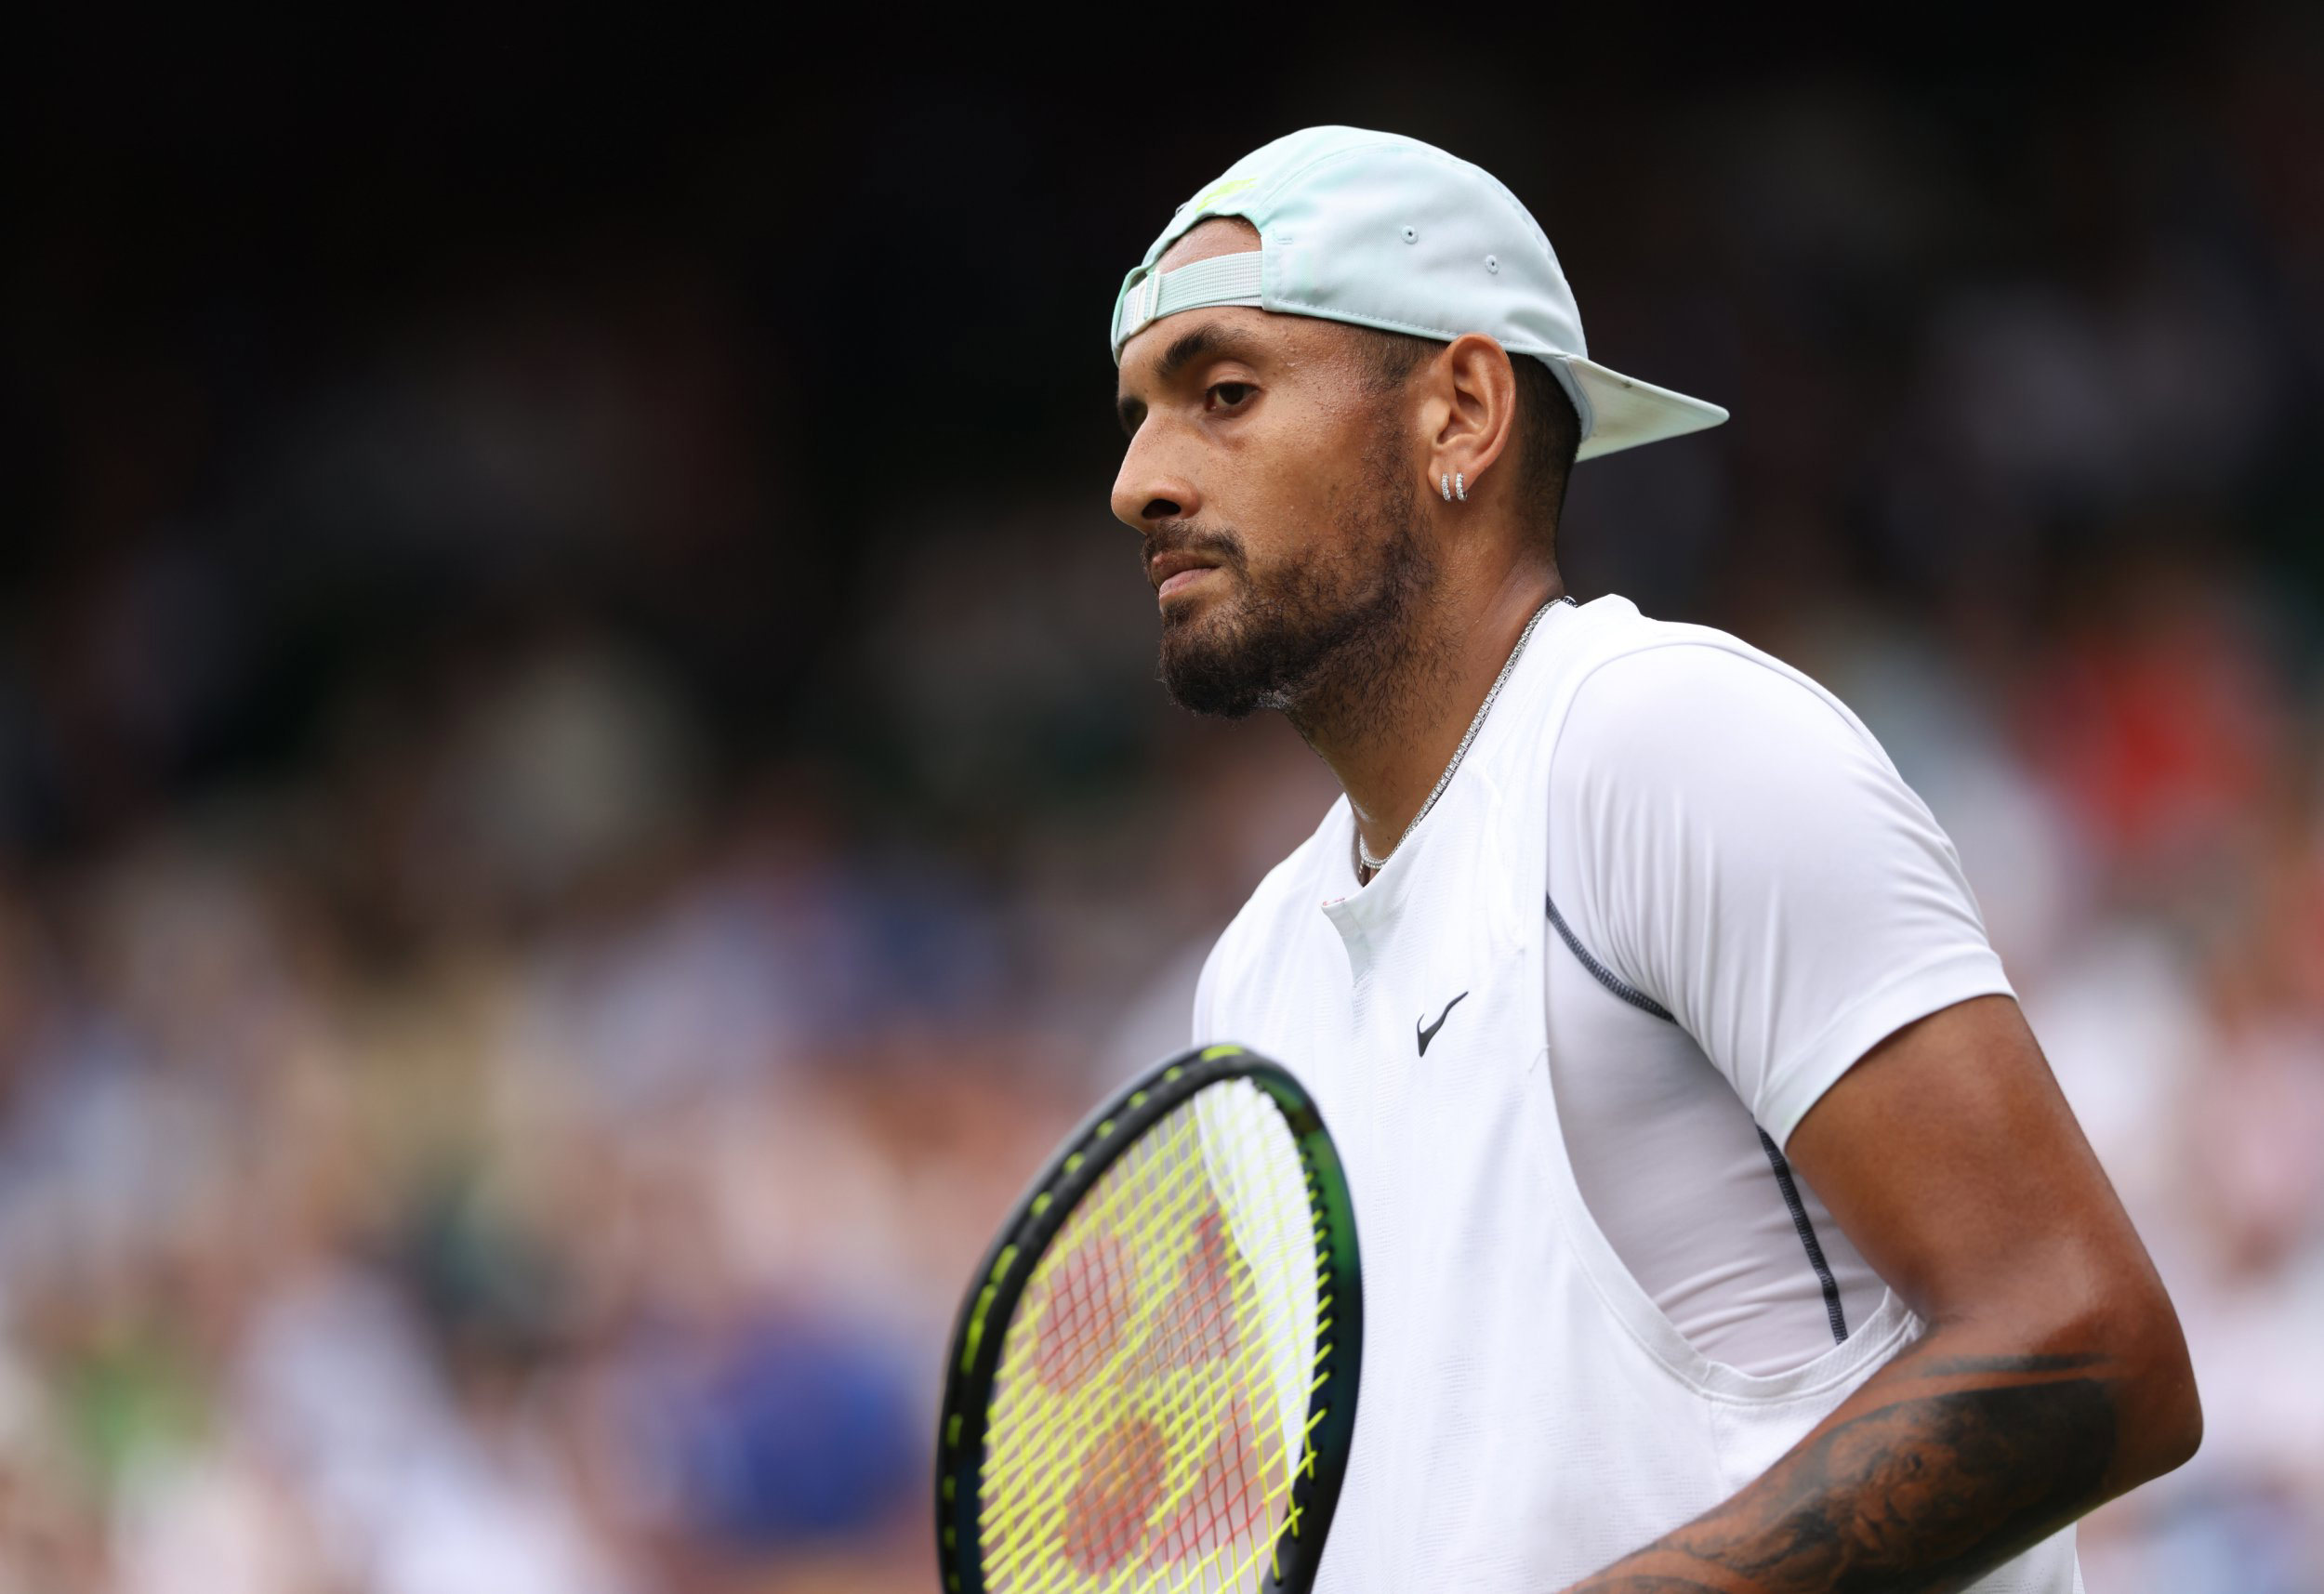 Nick Kyrgios Pulls Out Of Wimbledon Due To Injury On Eve Of Tournament